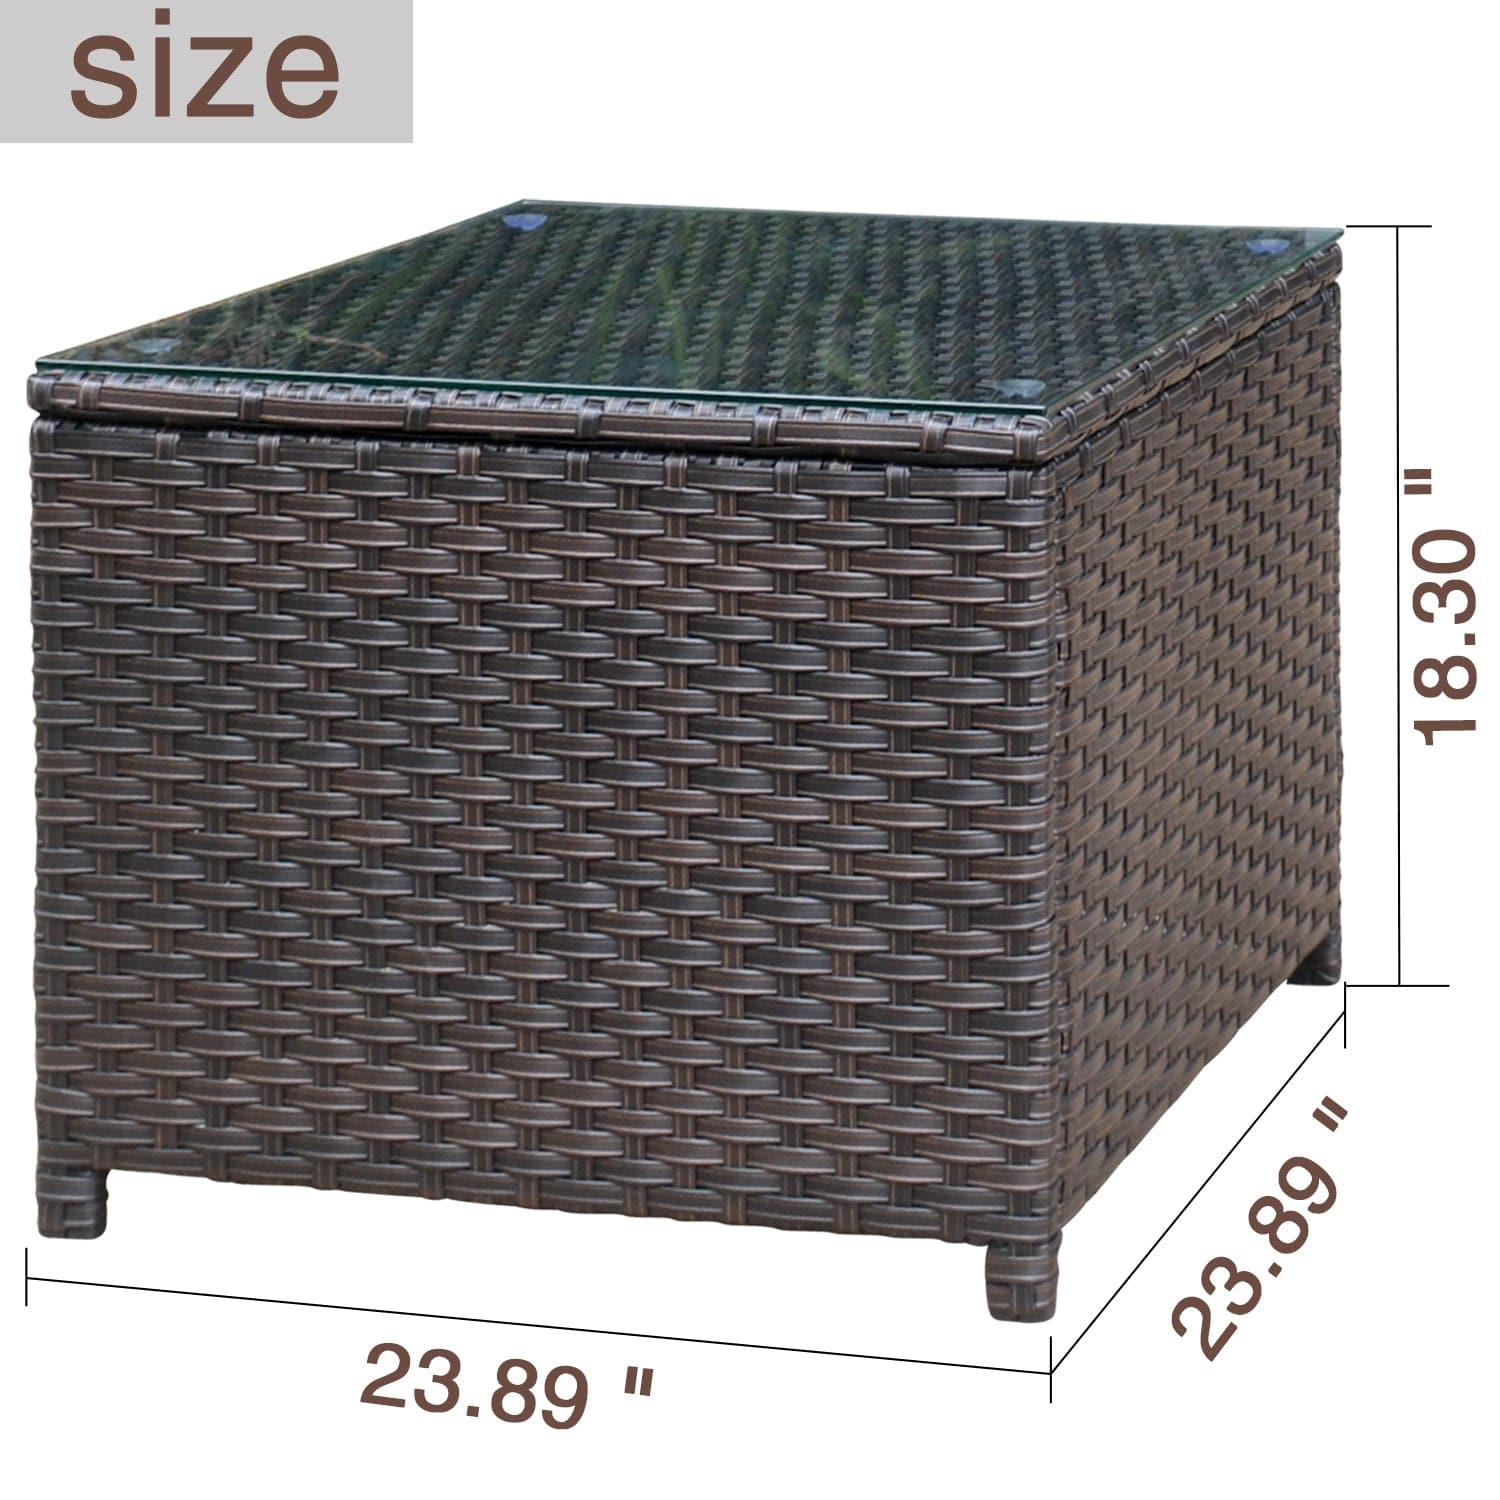 Ovios Brown Wicker Table with Glass Top for NTC Series